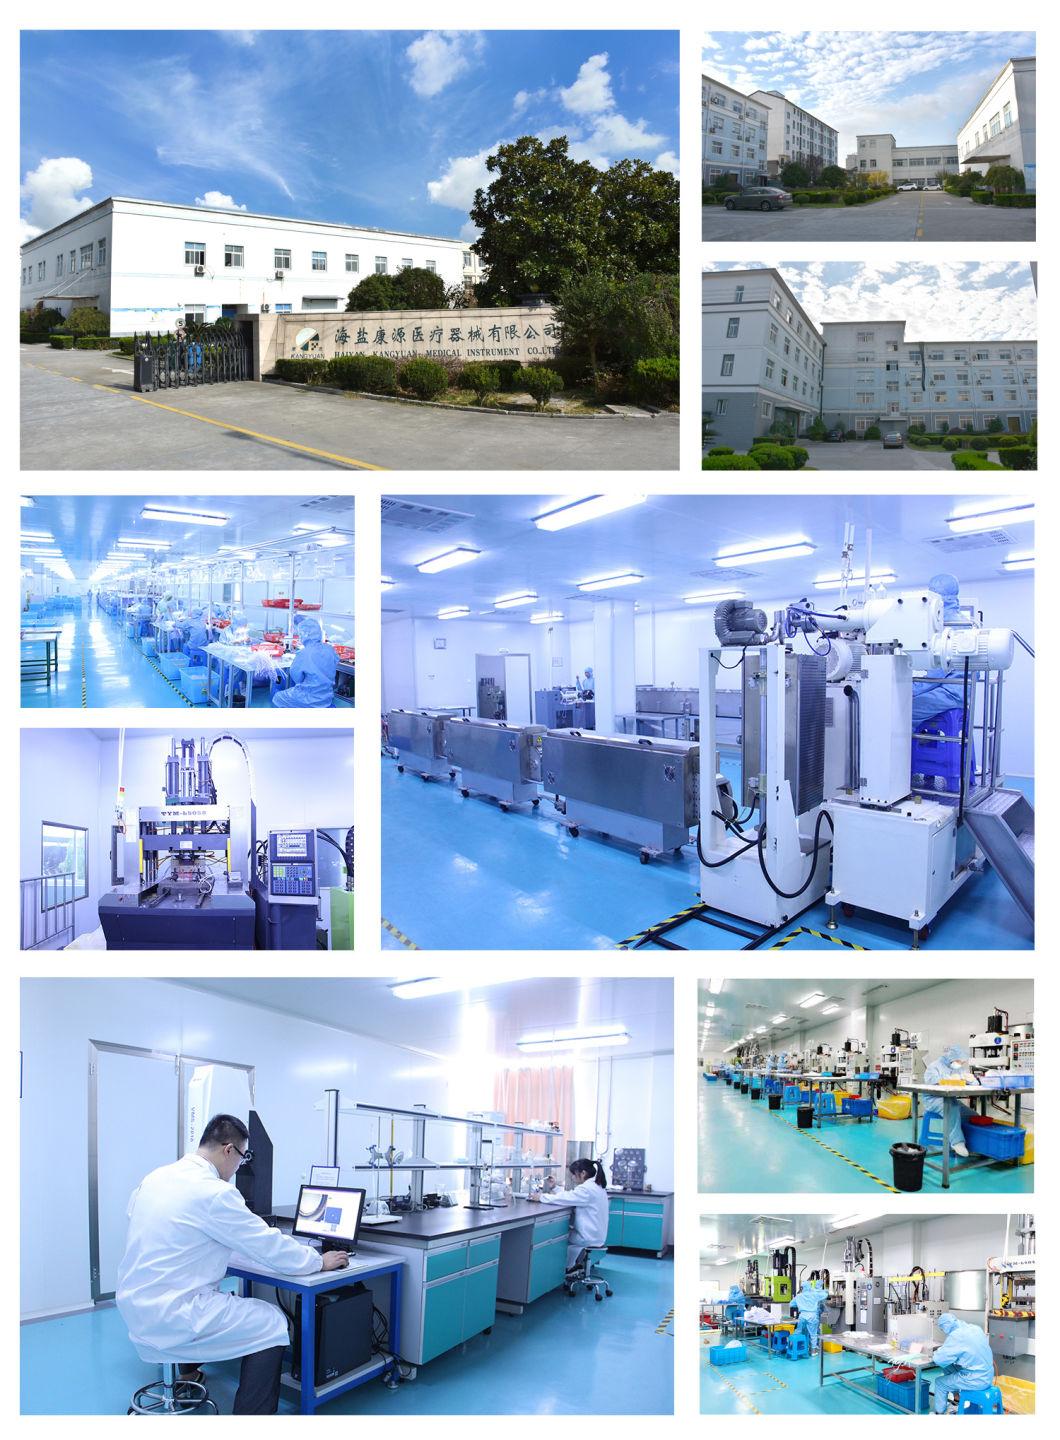 for Respiratory Treatment Oxygen Delivery PVC Factory ISO Suction Catheter China Supplier